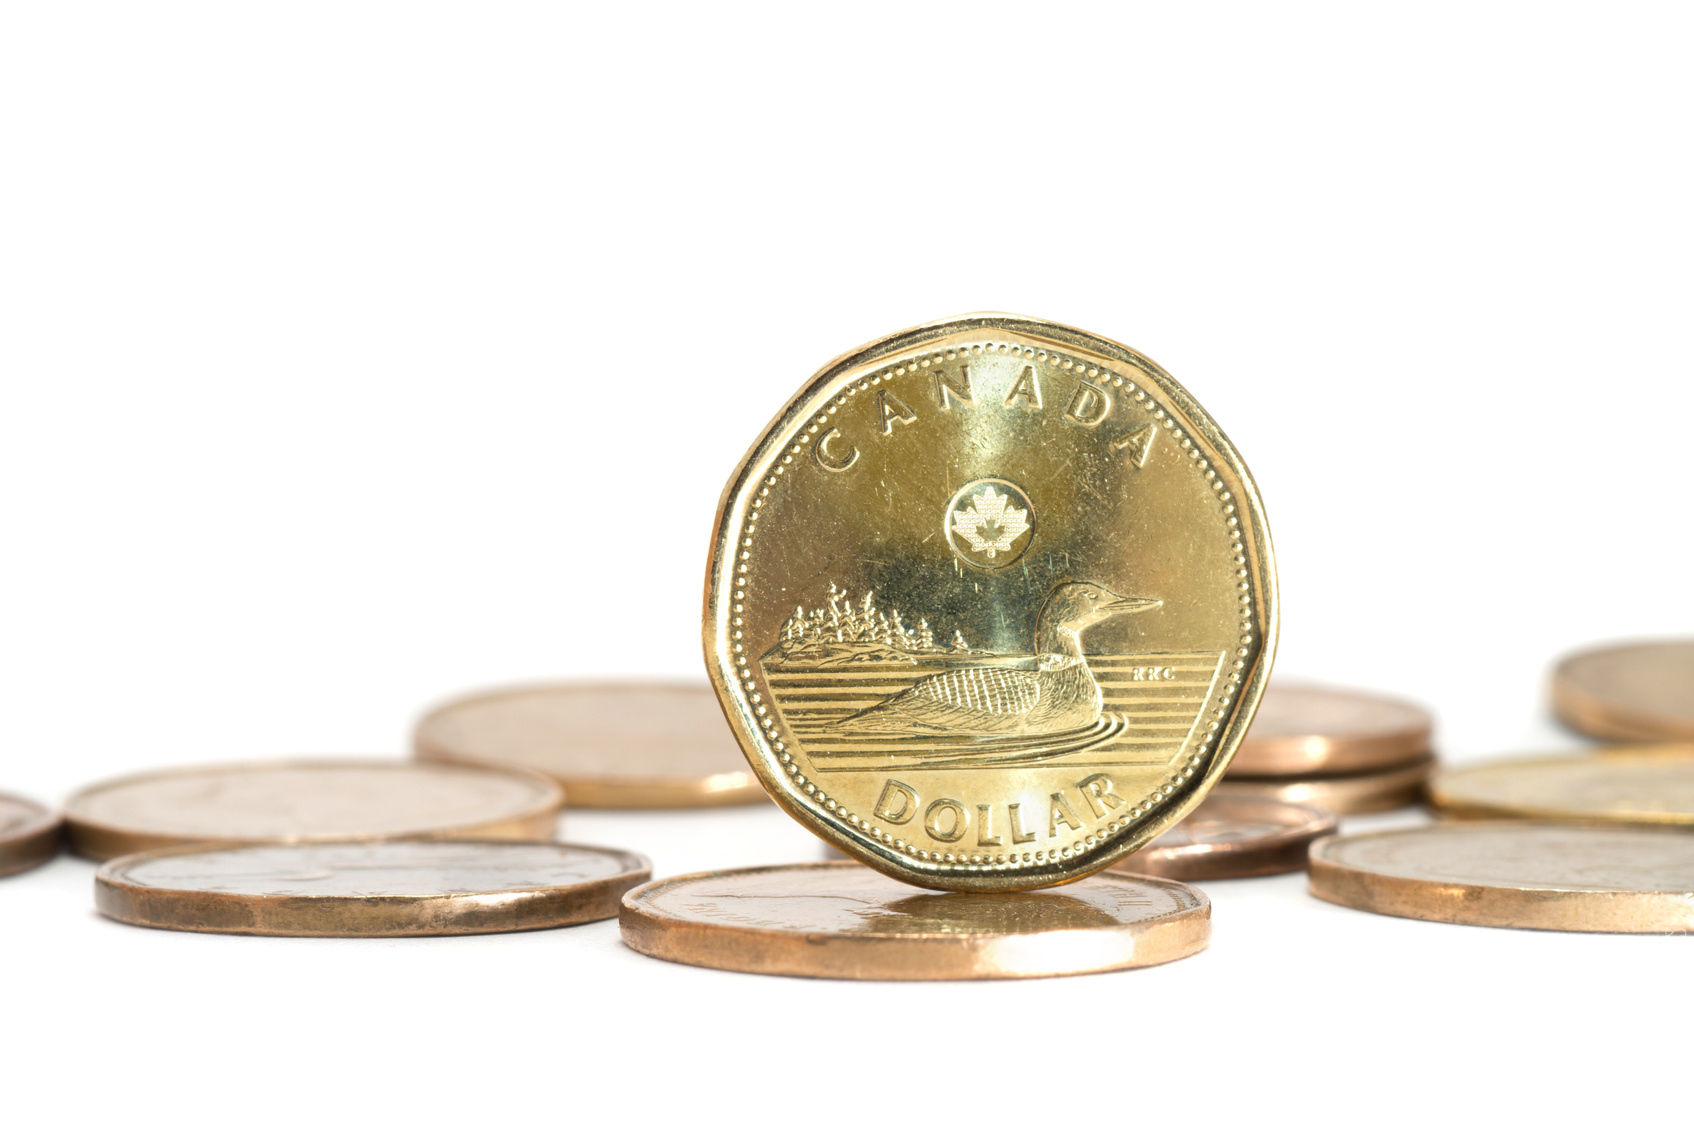 The challenges and opportunities of the Canadian dollar’s decline